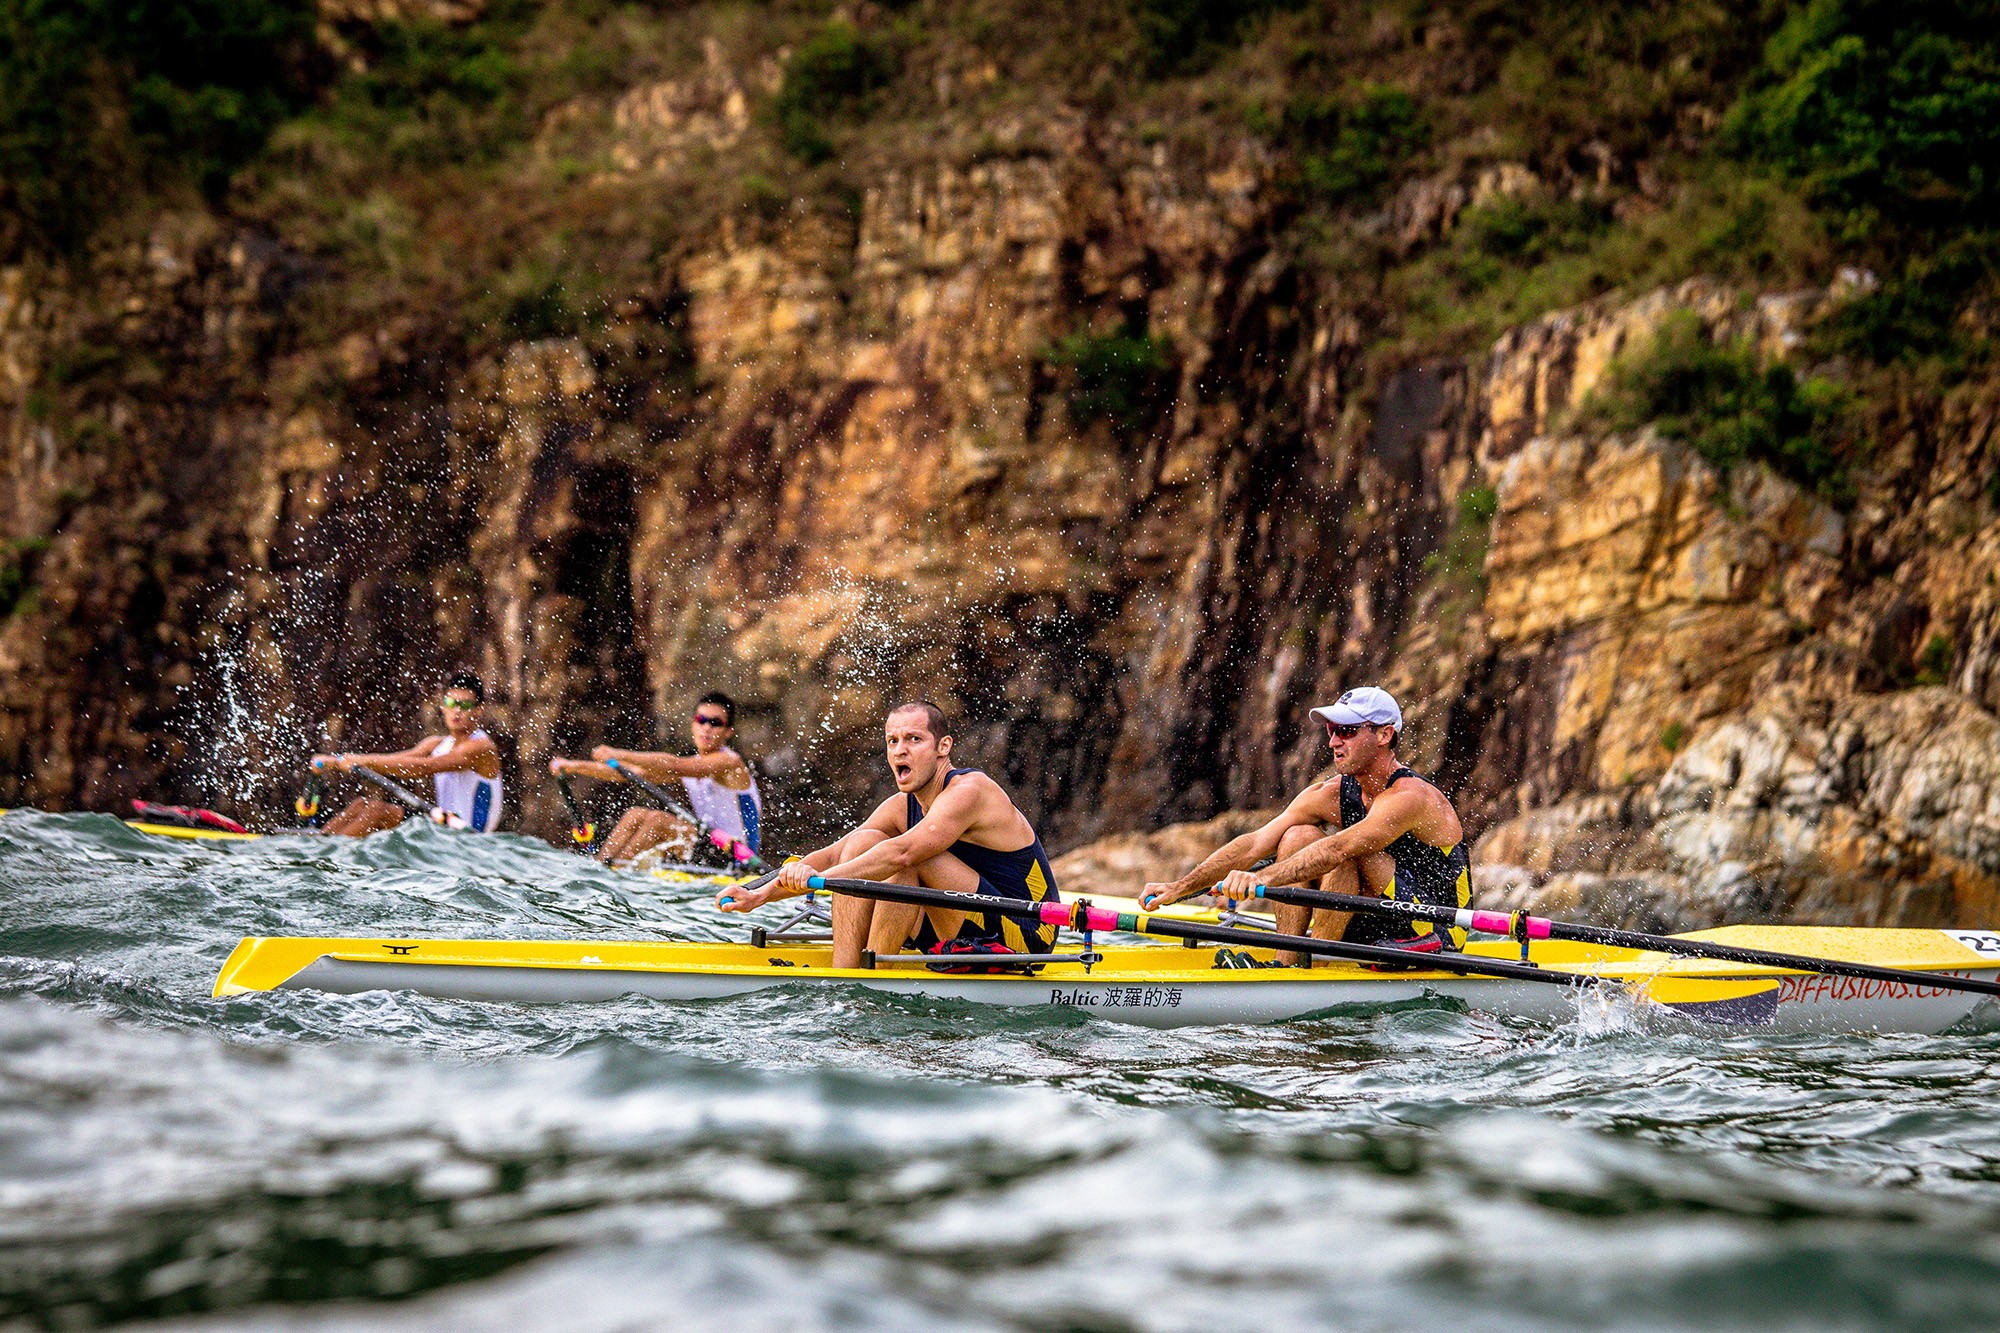 Hosting the World Rowing Coastal Championship in 2019 is expected to boost participation in the sport. Photos: RHKYC